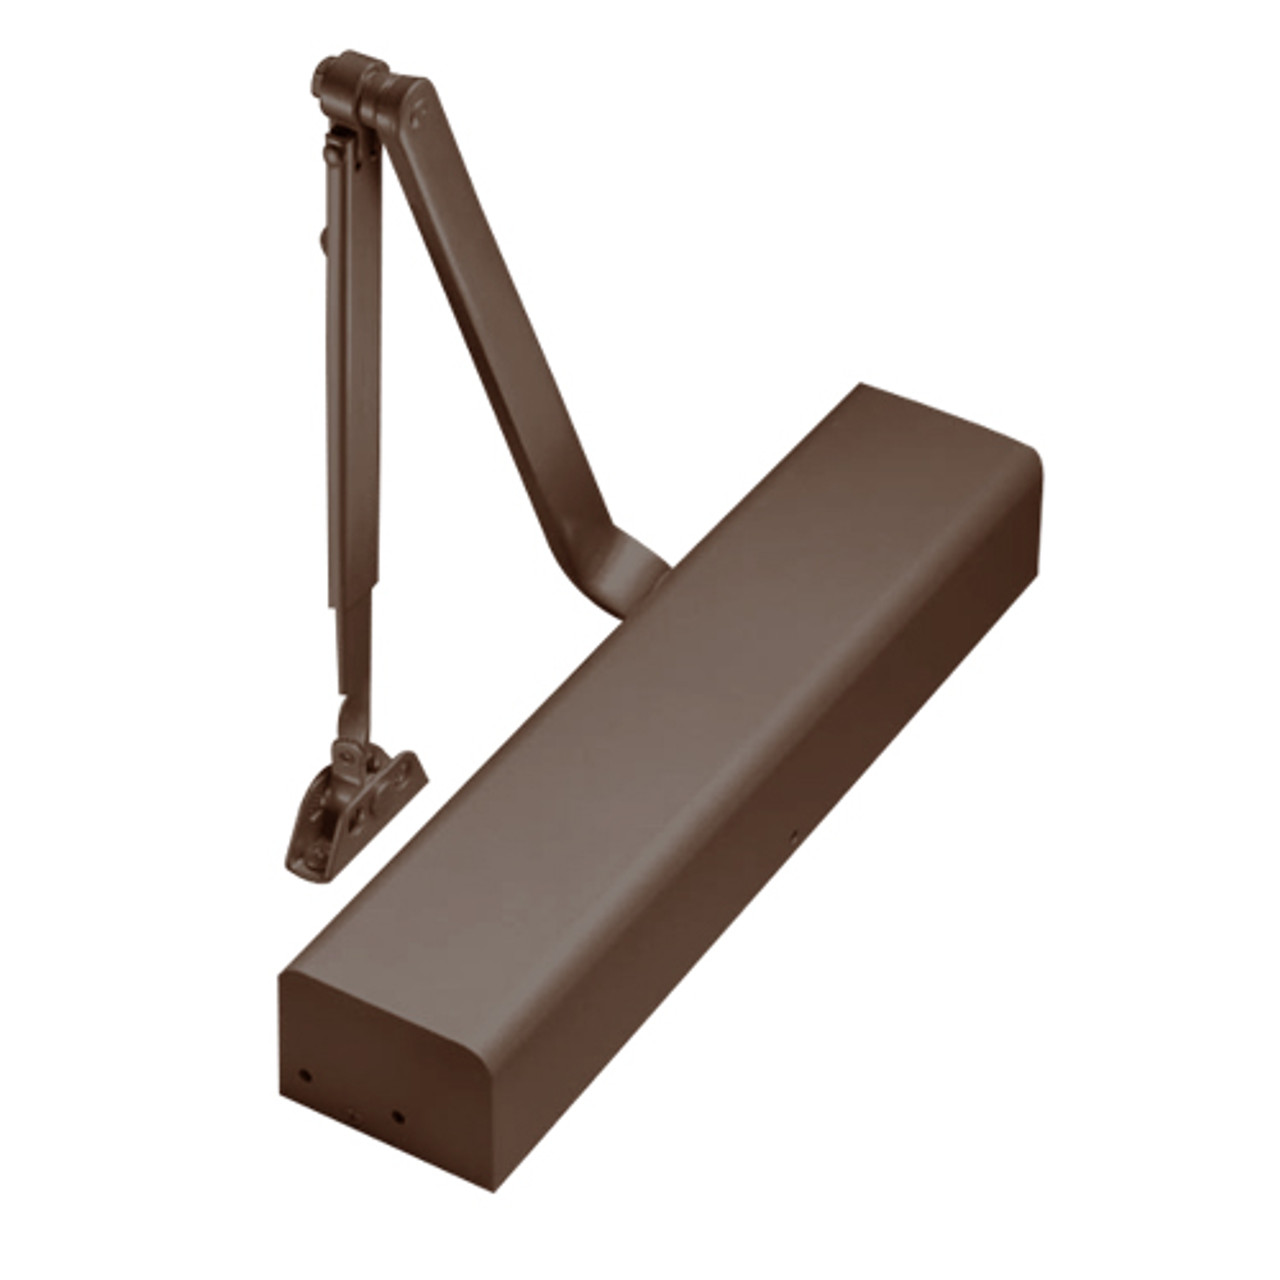 3501-690 Yale 3000 Series Architectural Door Closer with Regular Parallel and Top Jamb to 3" Reveal in Dark Bronze